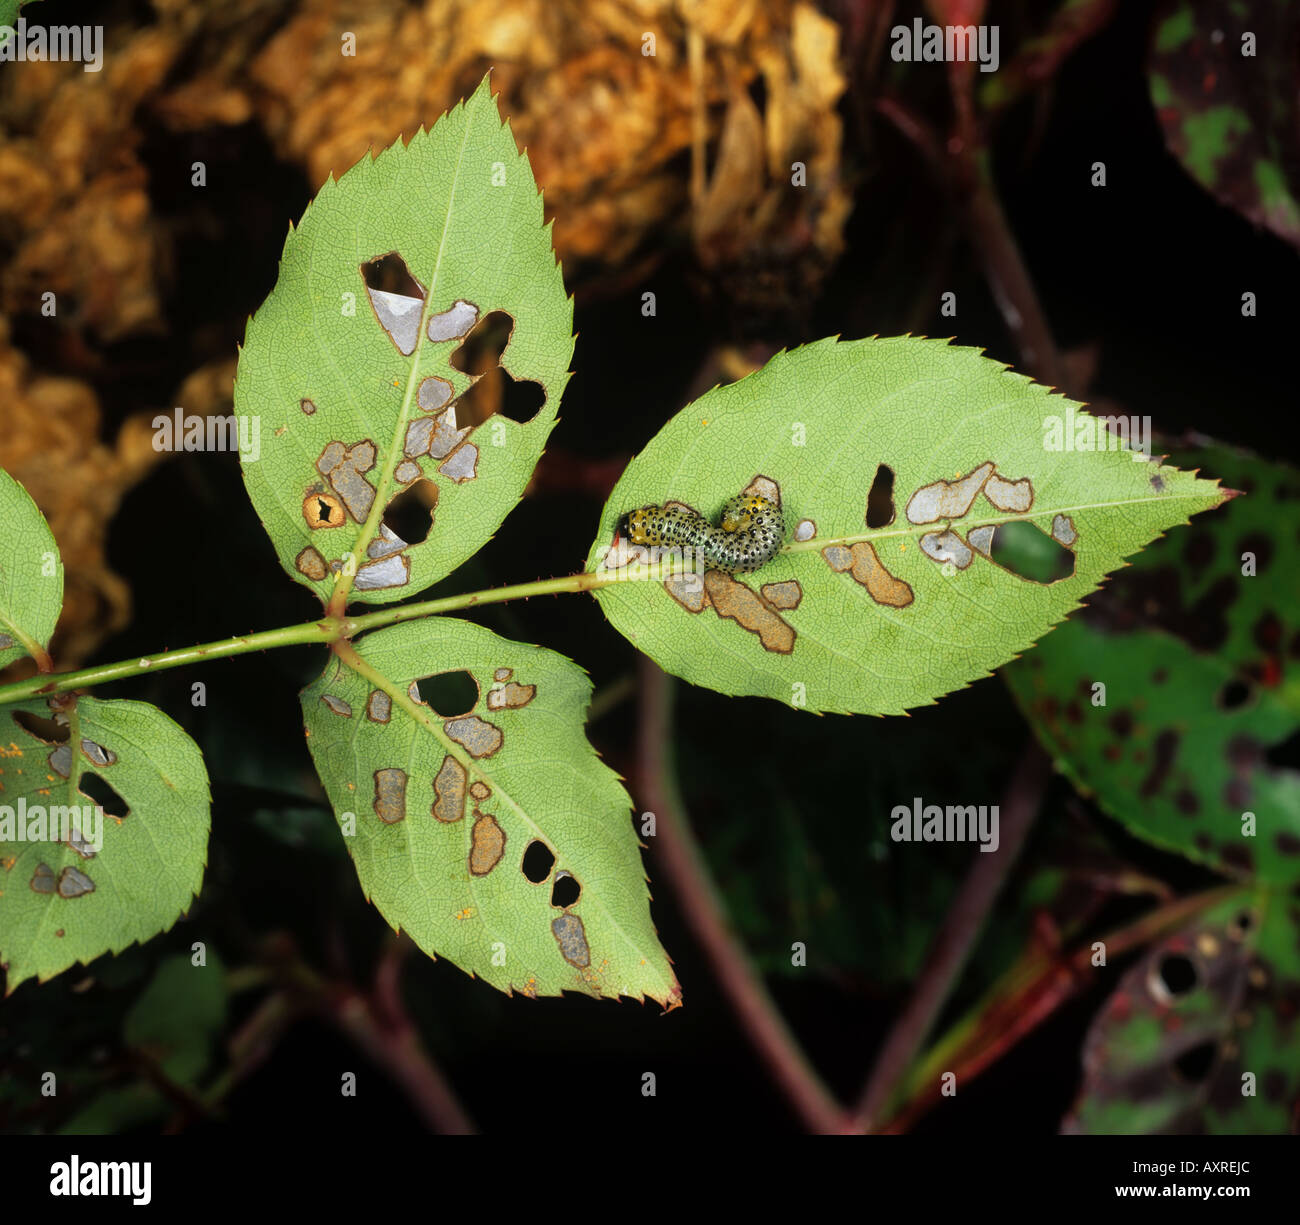 Large or variable rose sawfly Arge pagana larvae and damage to a rose leaf Stock Photo